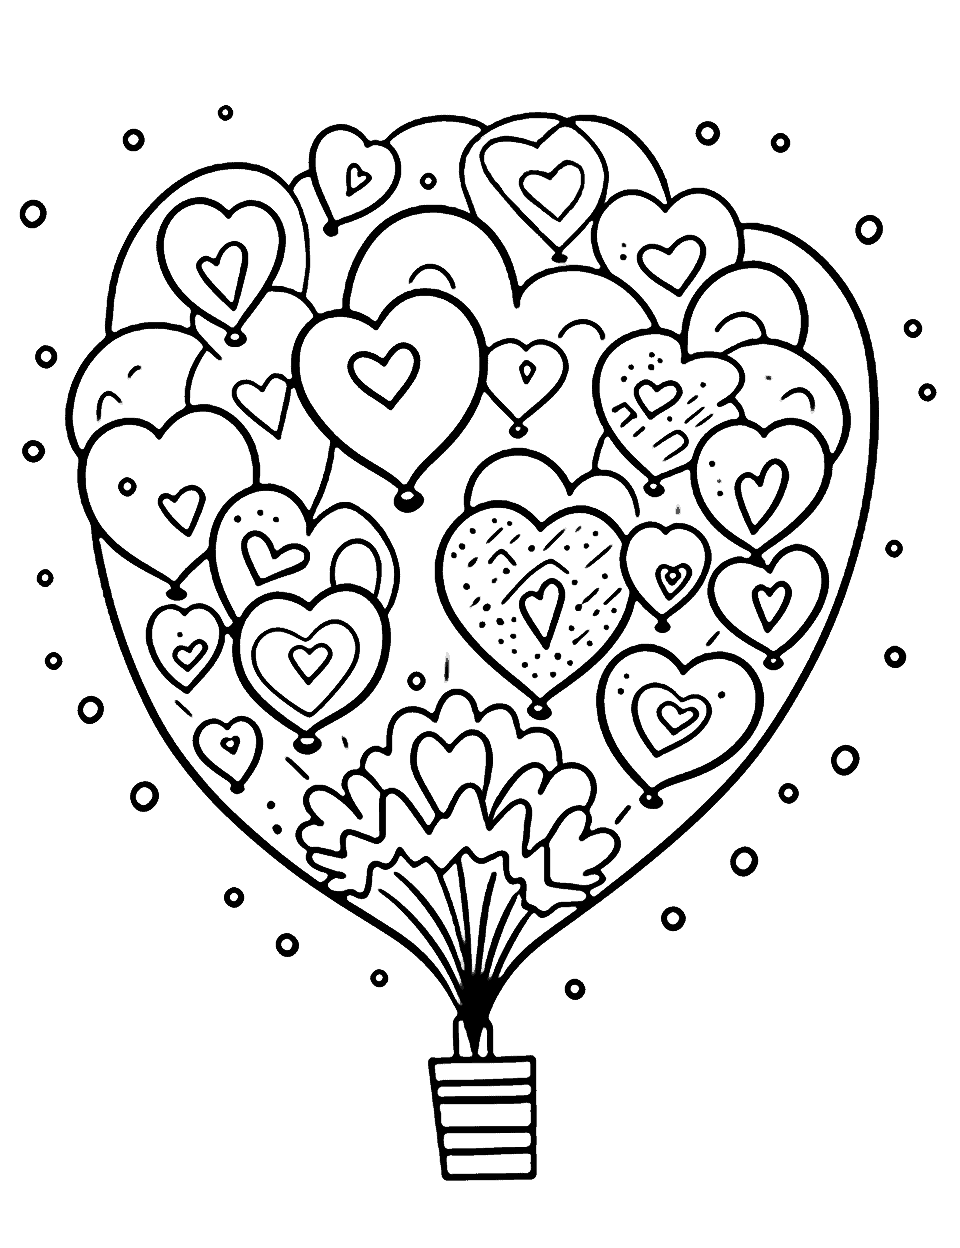 Heart-filled Birthday Happy Coloring Page - A large heart filled with numerous smaller hearts, each containing a birthday symbol like a cake, gift, or balloon.